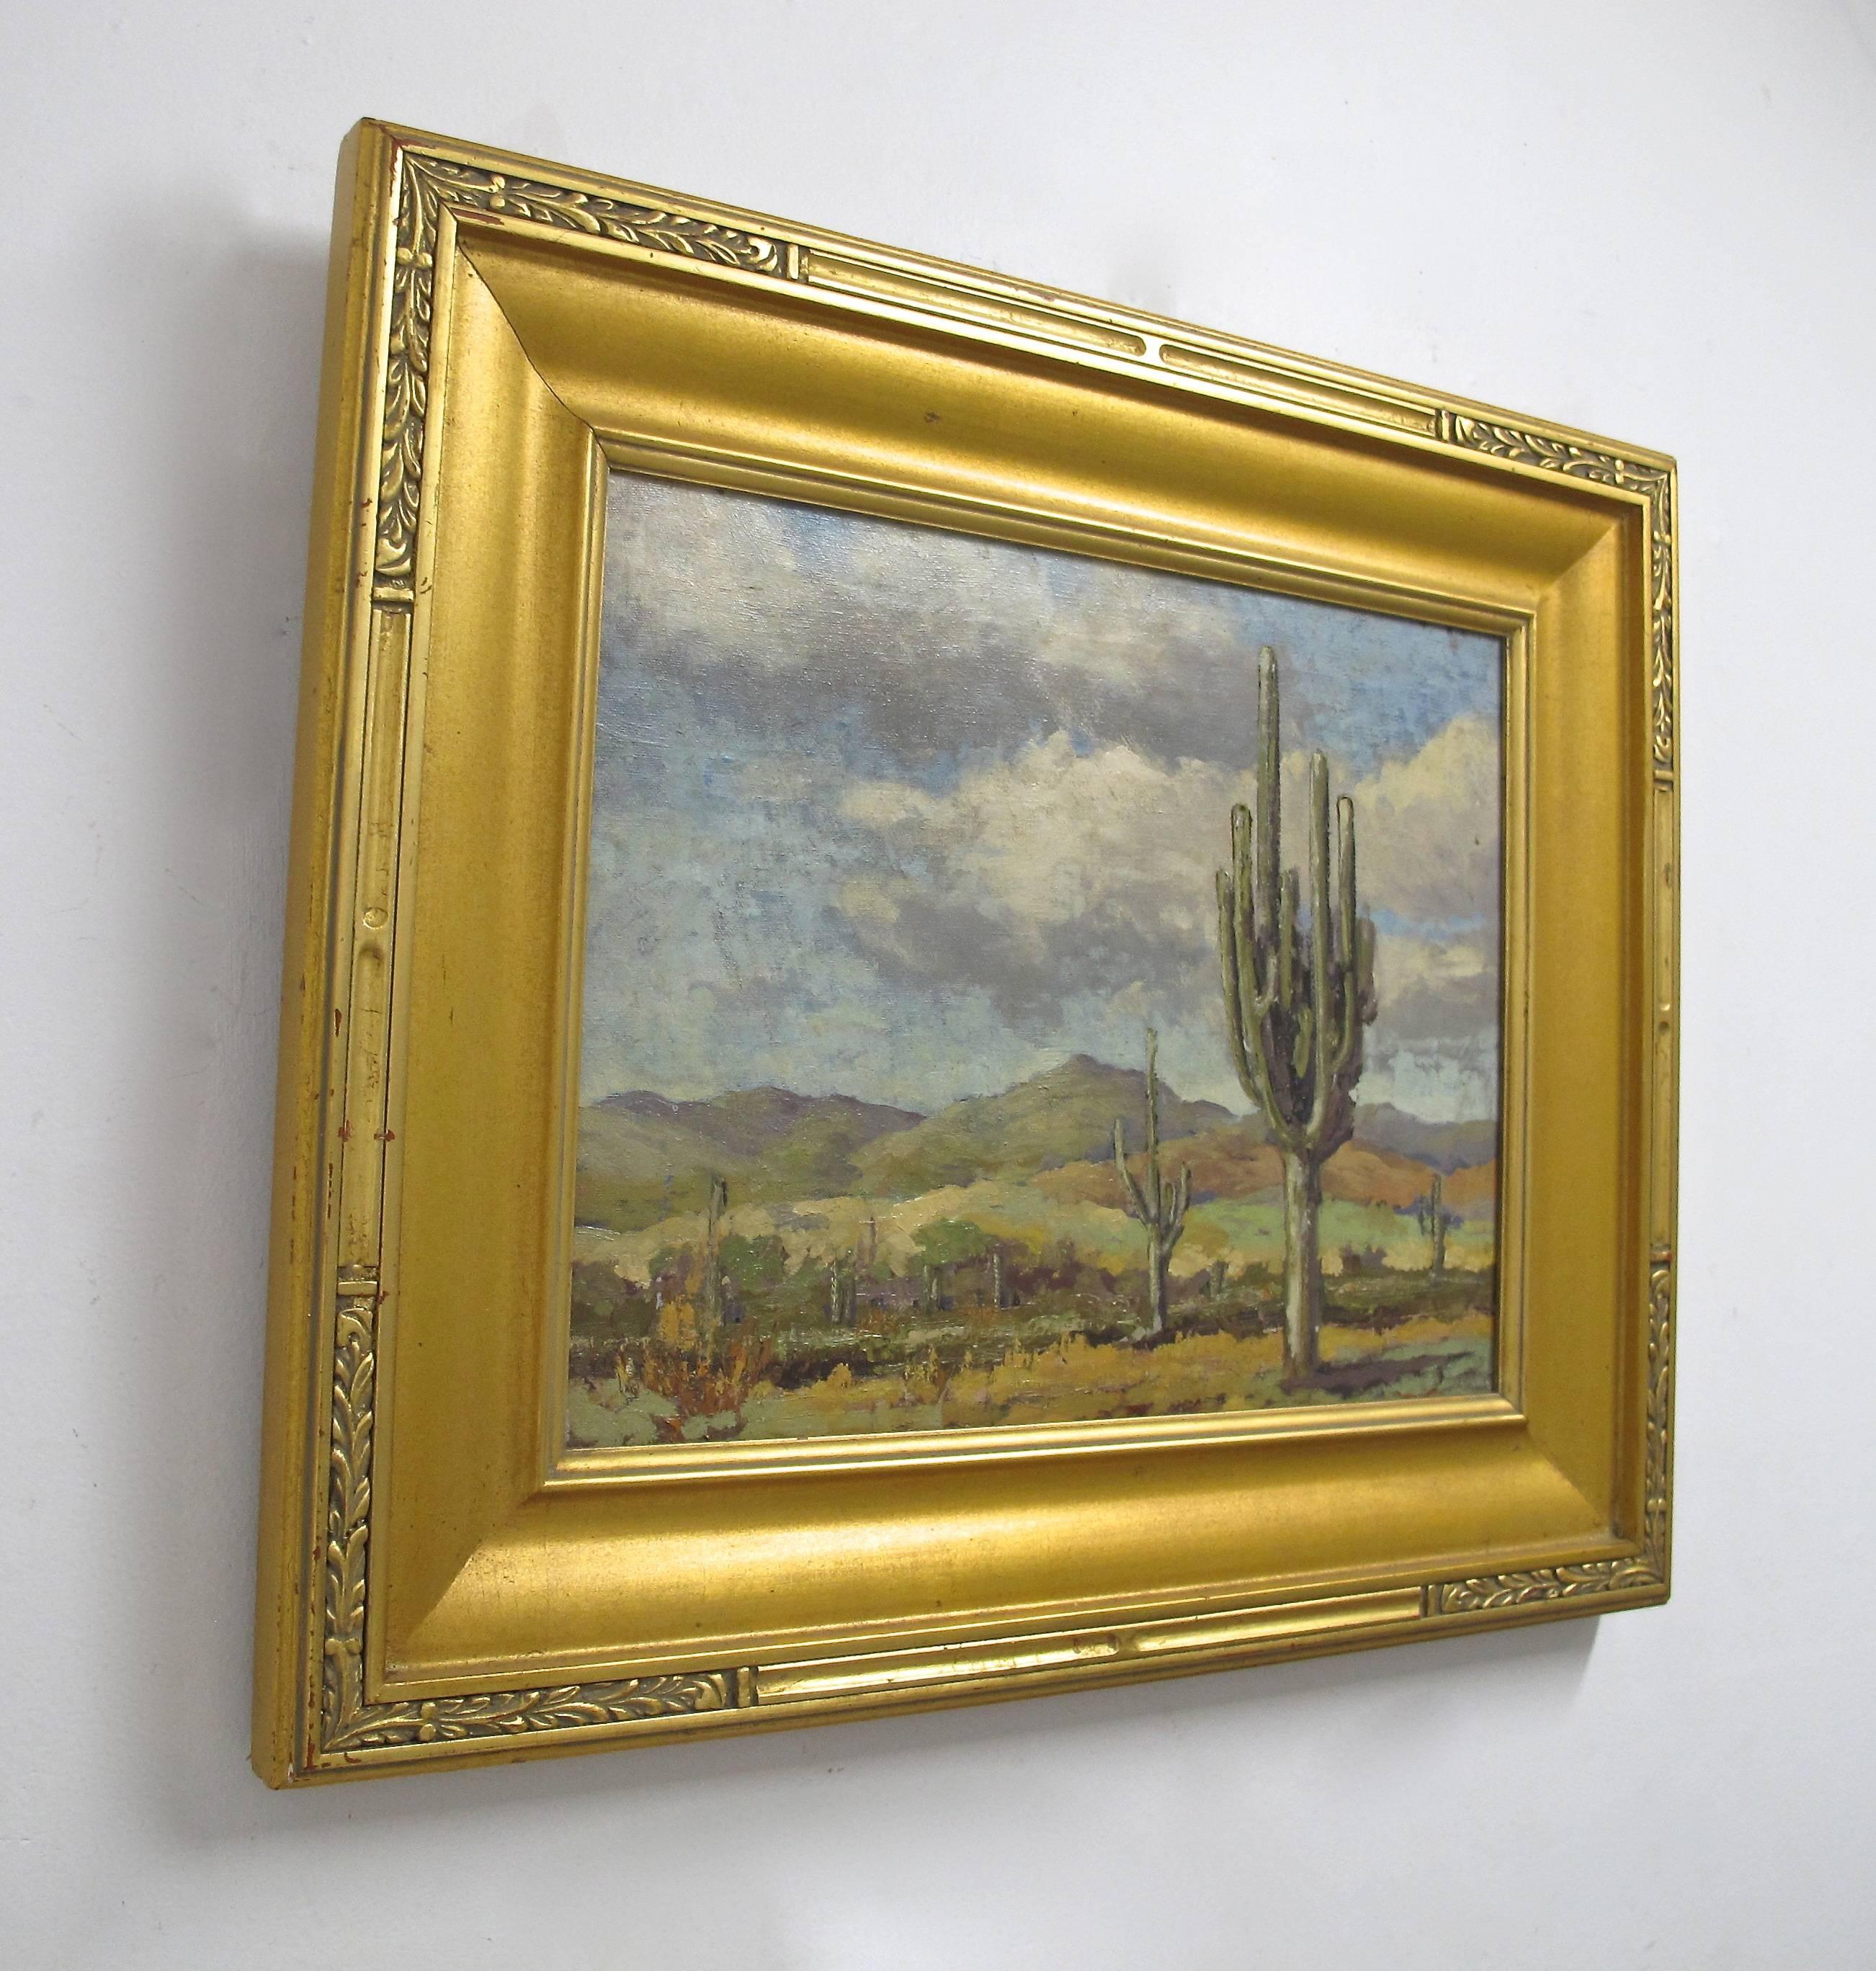 Desert landscape painting by Frank L. Sanford. Oil on canvas in painted wood frame. American, mid 20th century.

Frank Leslie Sandford was  a painter and a designer.  He was born in Oakland, CA on Oct. 27, 1891.  Sandford settled in Los Angeles in